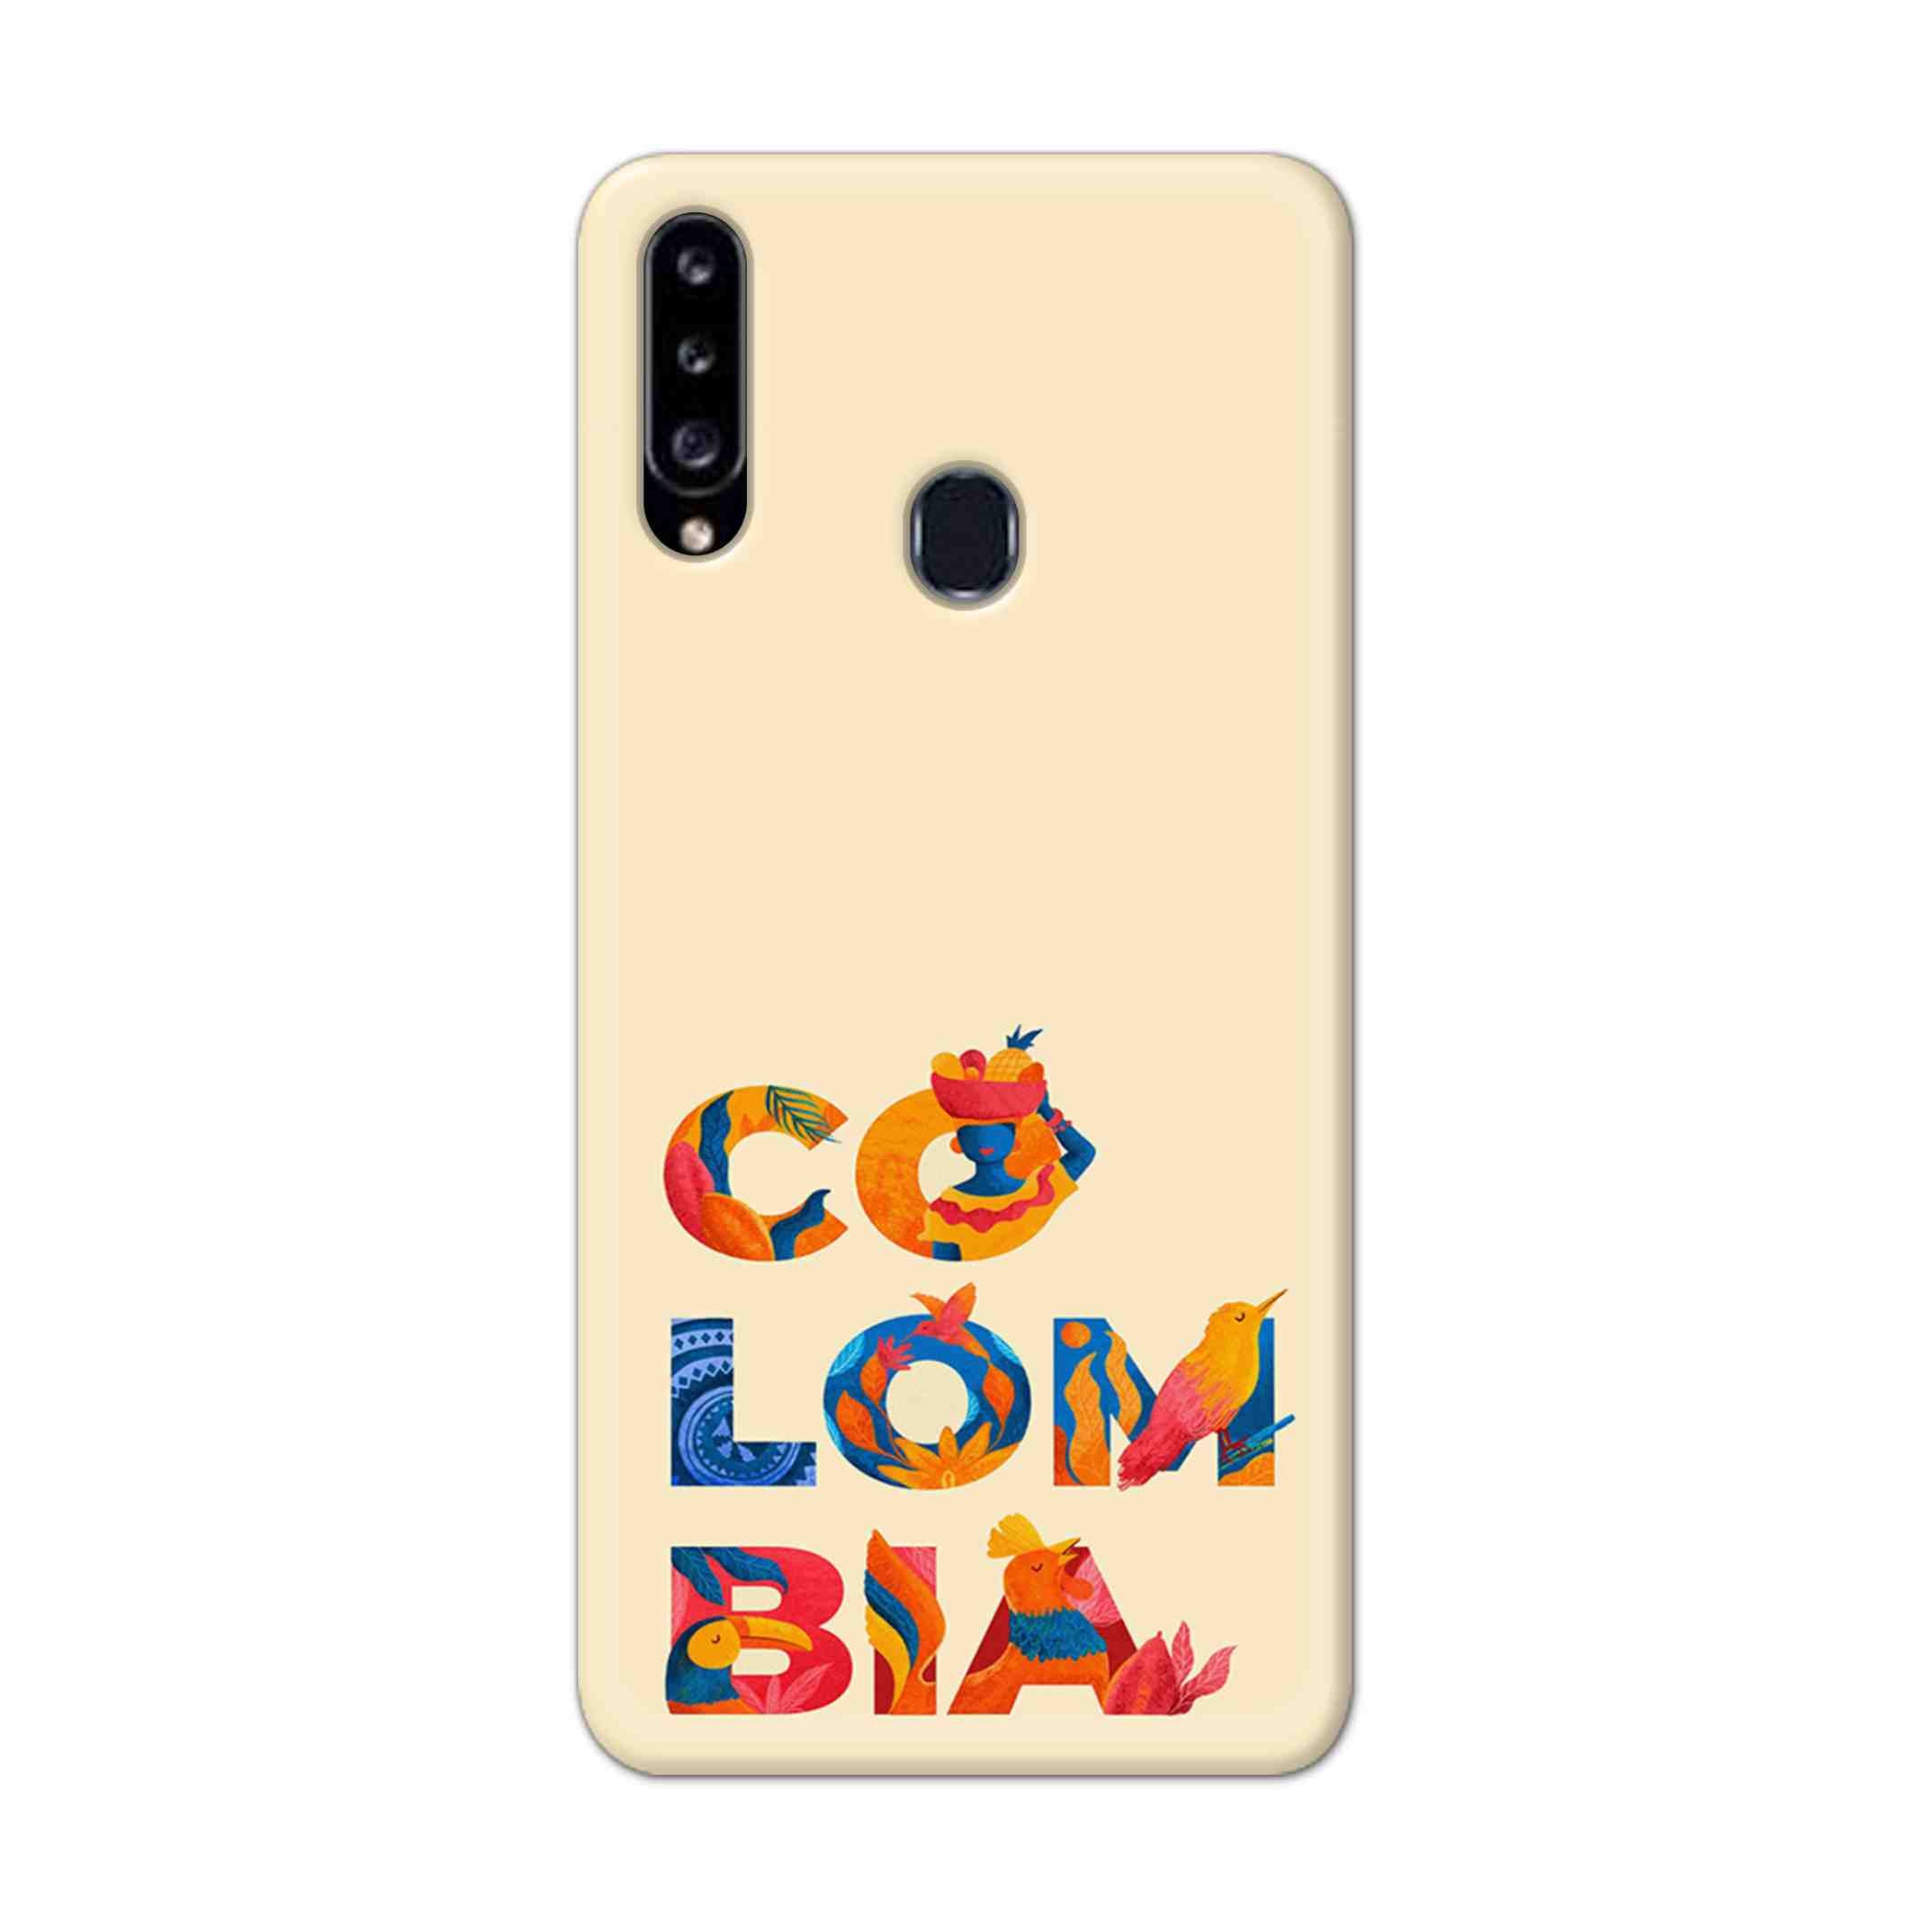 Buy Colombia Hard Back Mobile Phone Case Cover For Samsung Galaxy A21 Online